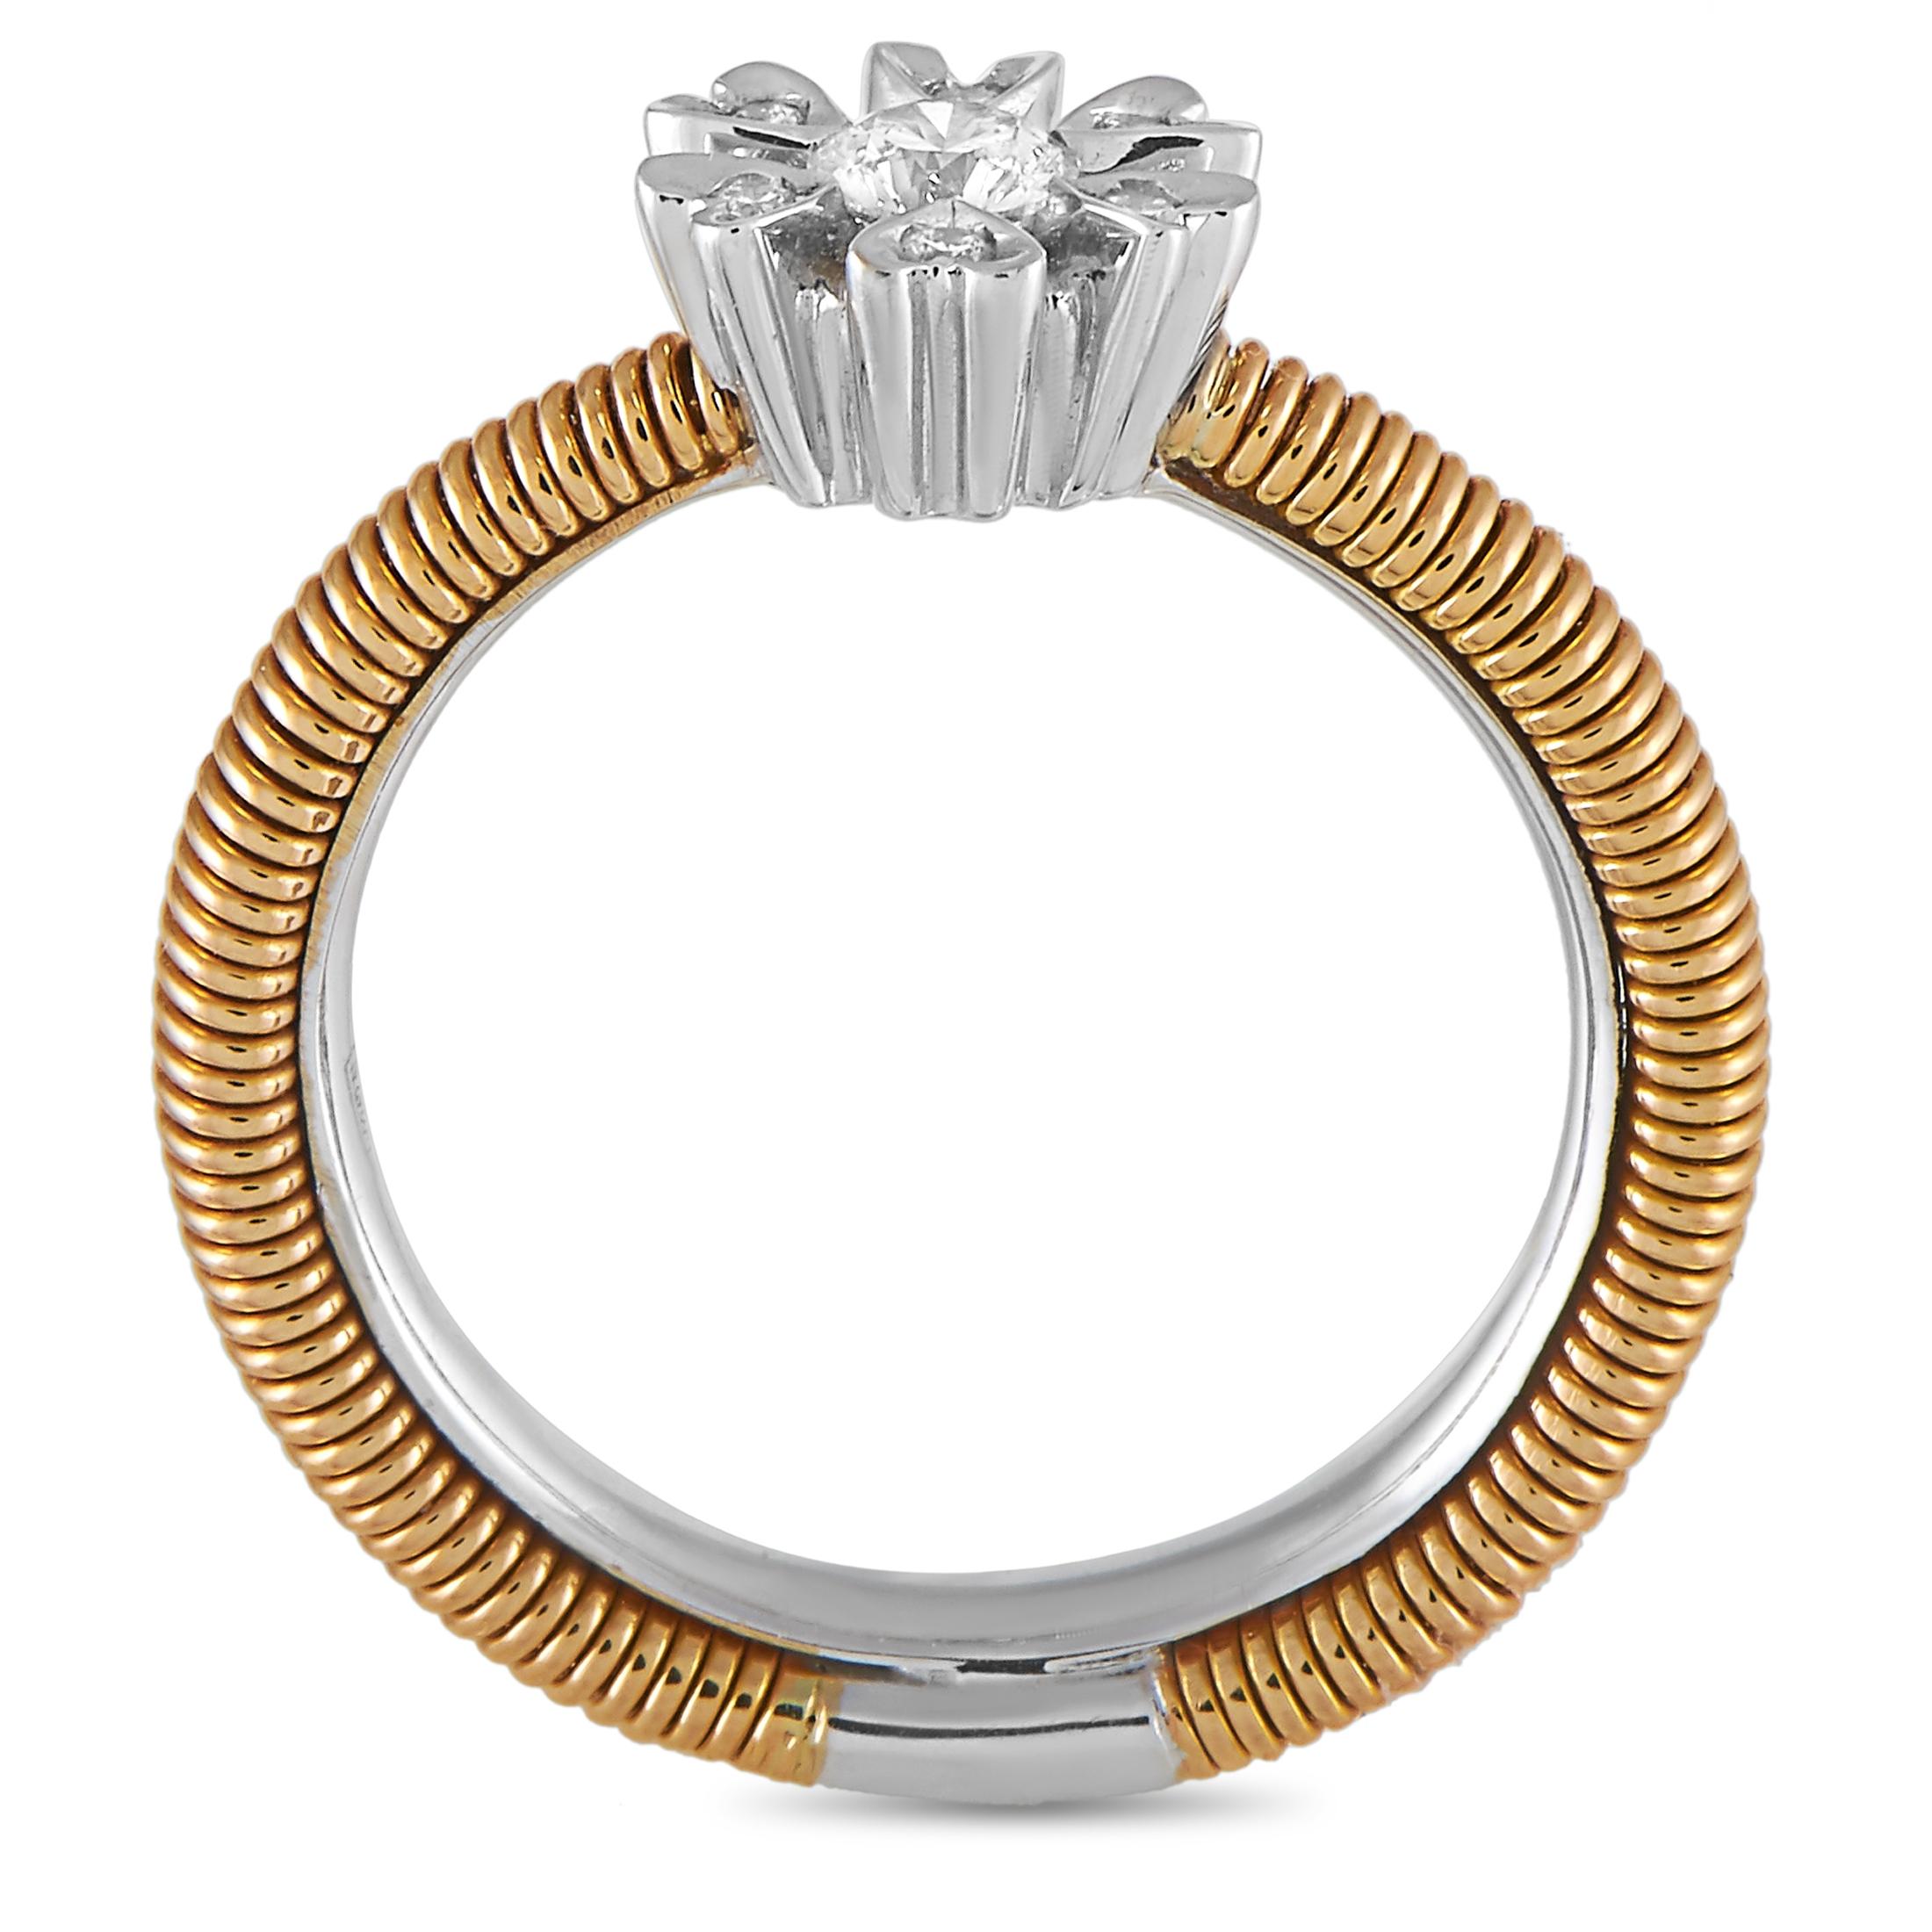 This Oro Trend ring is made out of 18K rose and white gold and weighs 7 grams, boasting band thickness of 3 mm and top height of 5 mm, while top dimensions measure 8 by 8 mm. The ring is embellished with diamonds that amount to 0.28 carats.

Offered